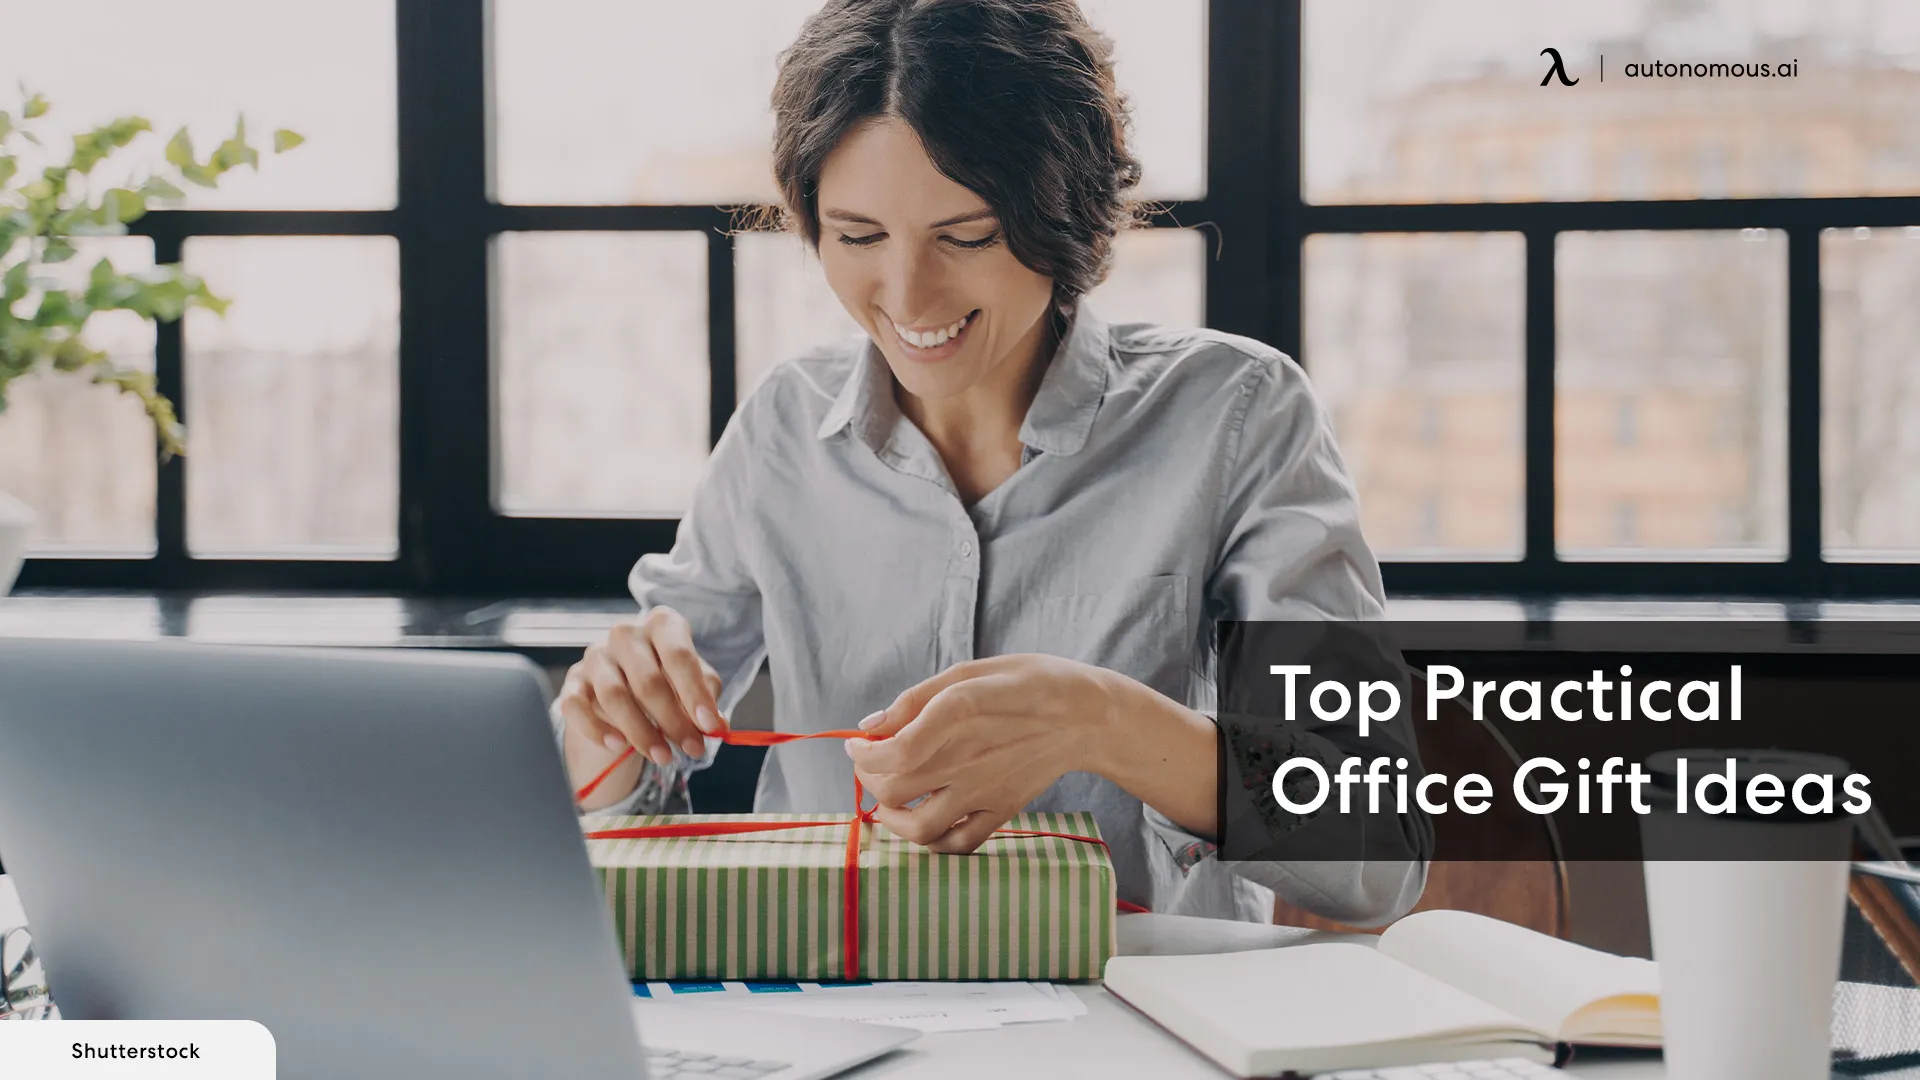 Explore The Best Useful and Practical Office Gifts